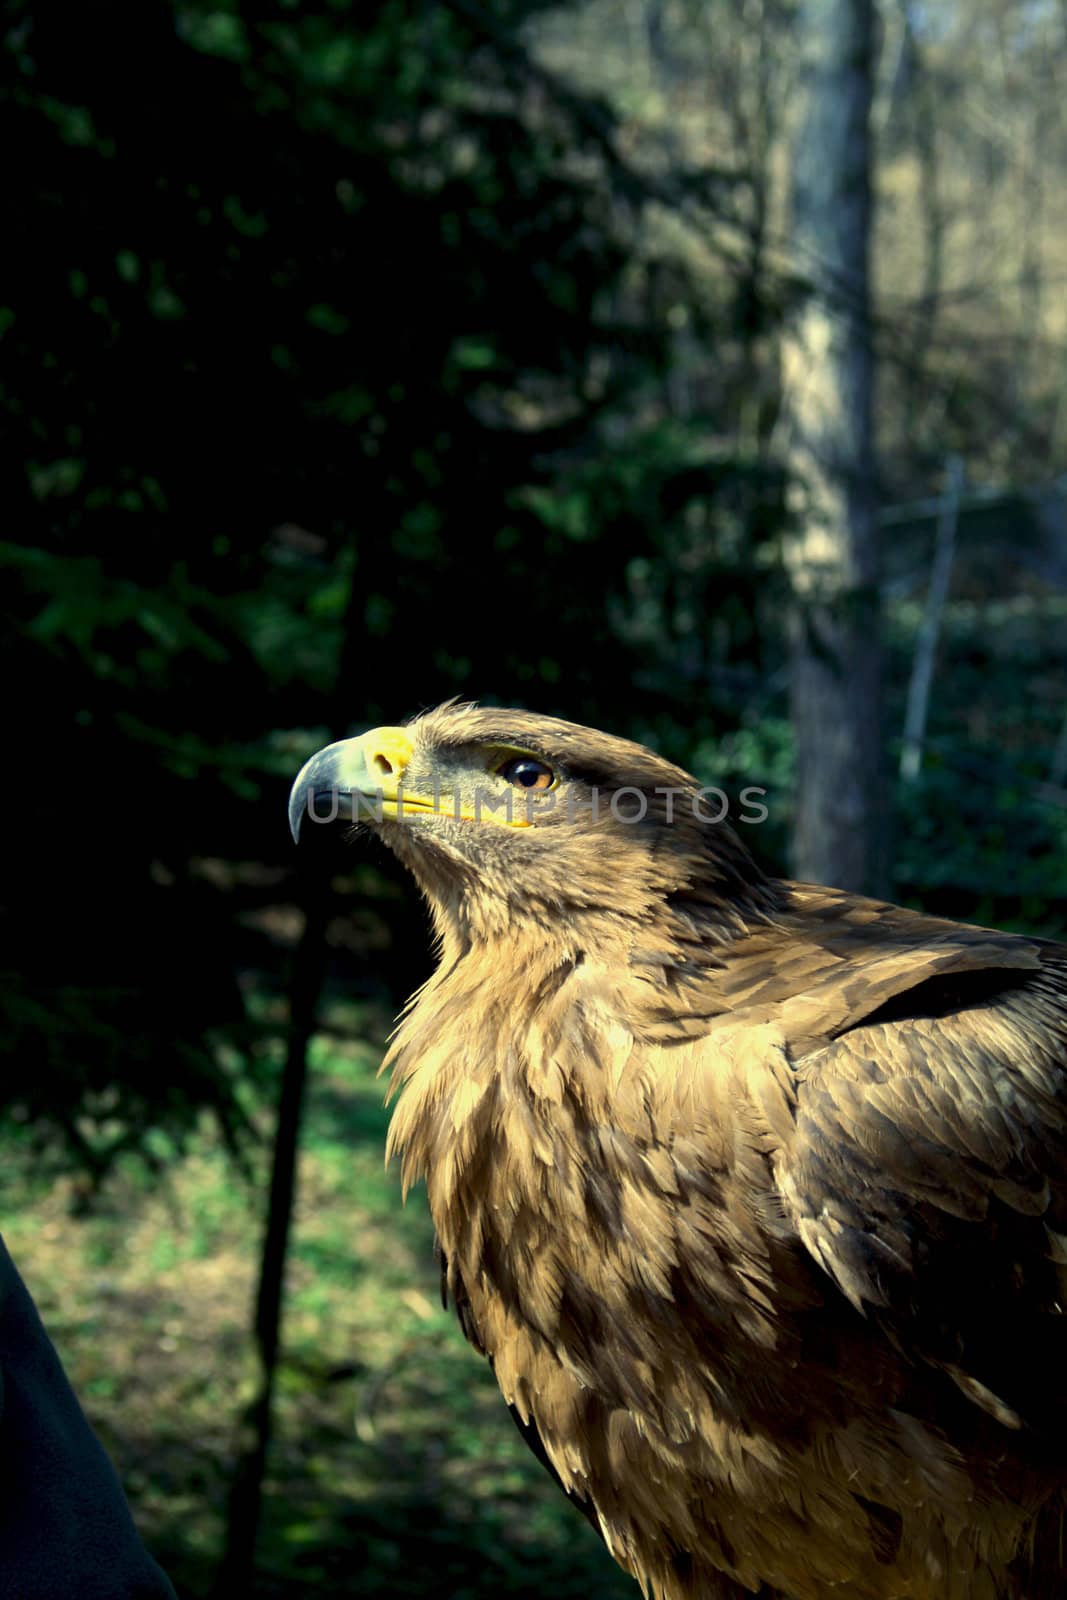 A golden eagle with a leafy environment